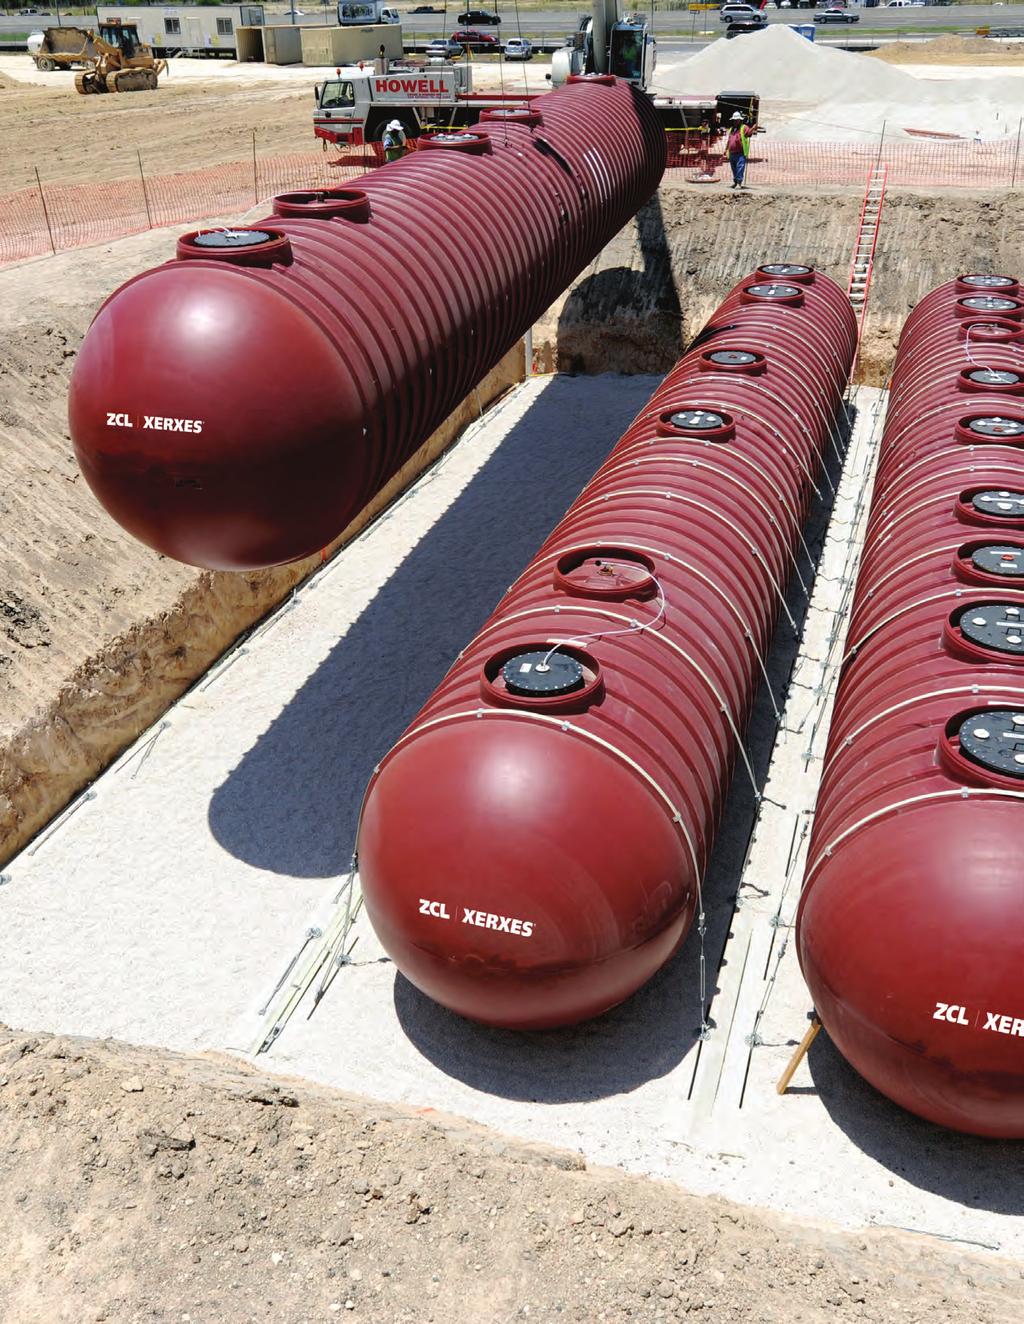 ZCL XERXES RELIABLE, CORROSION-RESISTANT TANKS OVER 200,000